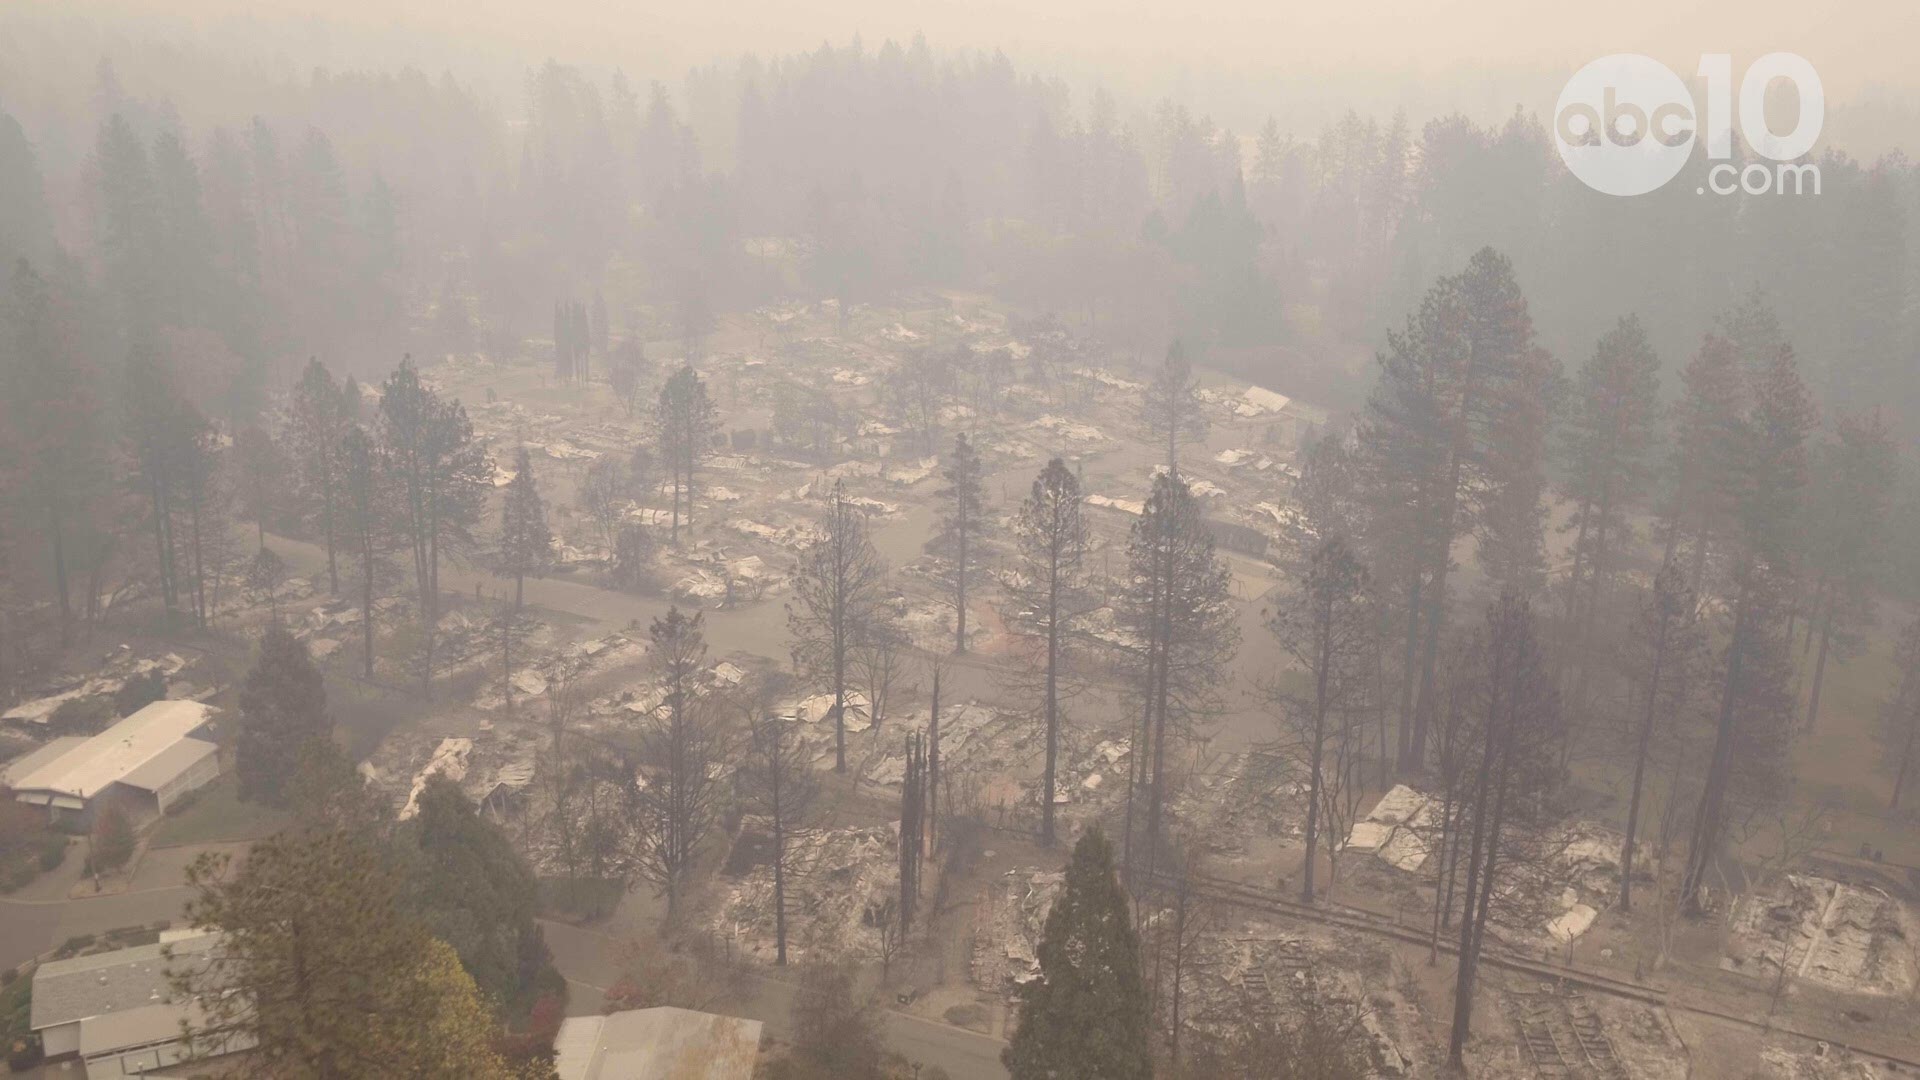 PARADISE: Drone footage shows what is left of the small town ravaged by the #CampFire. (Cal Fire and the FAA granted us permission for a brief flight over central Paradise. No firefighting efforts were impacted.)